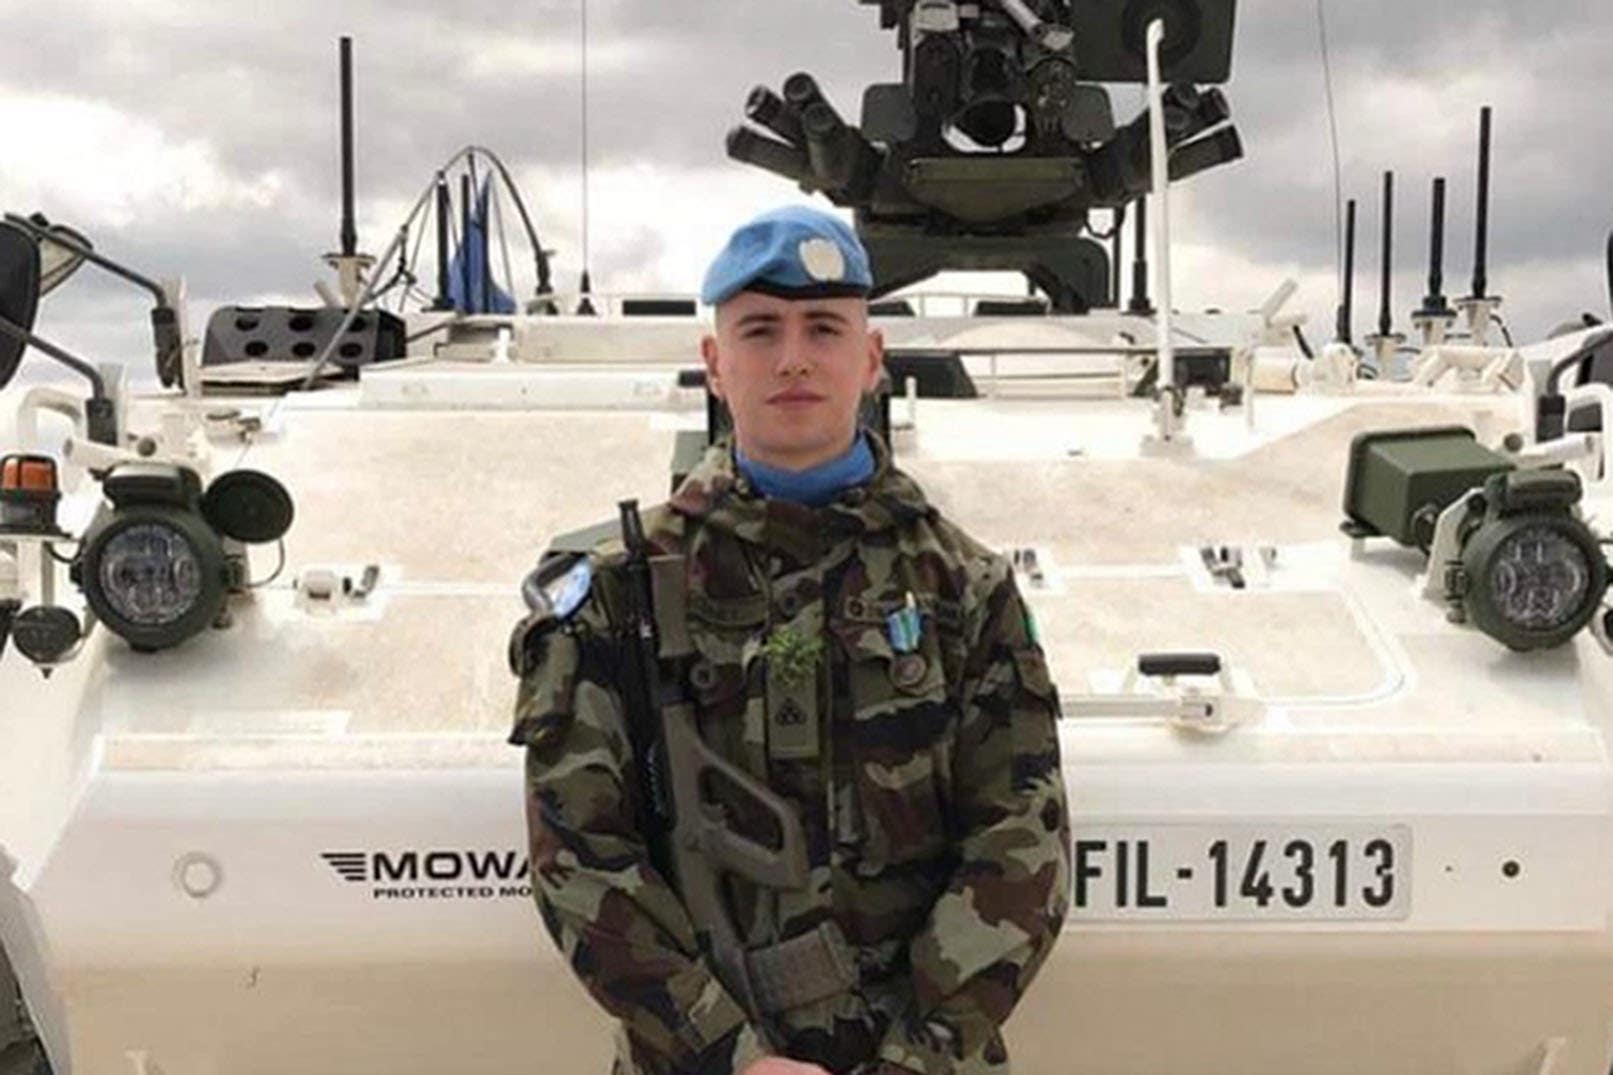 Private Sean Rooney of Newtowncunningham in Co Donegal, the Irish peacekeeping soldier killed in Lebanon (Defence Forces/PA)